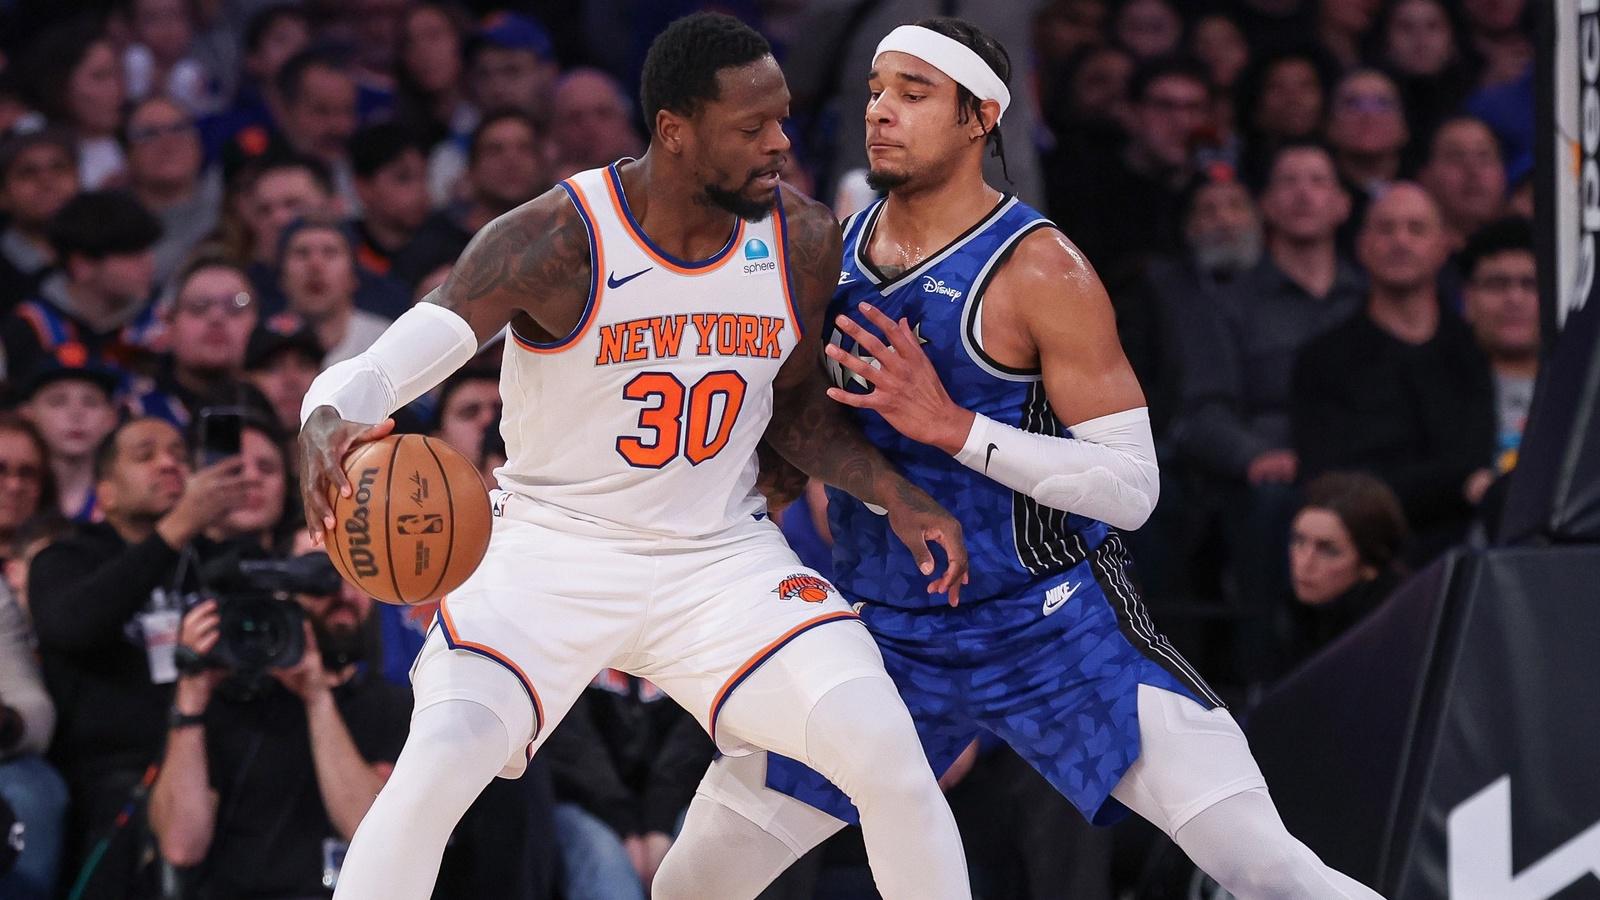 New York Knicks forward Julius Randle (30) dribbles while defended by Orlando Magic forward Chuma Okeke (3) during the first half at Madison Square Garden. / Vincent Carchietta-USA TODAY Sports